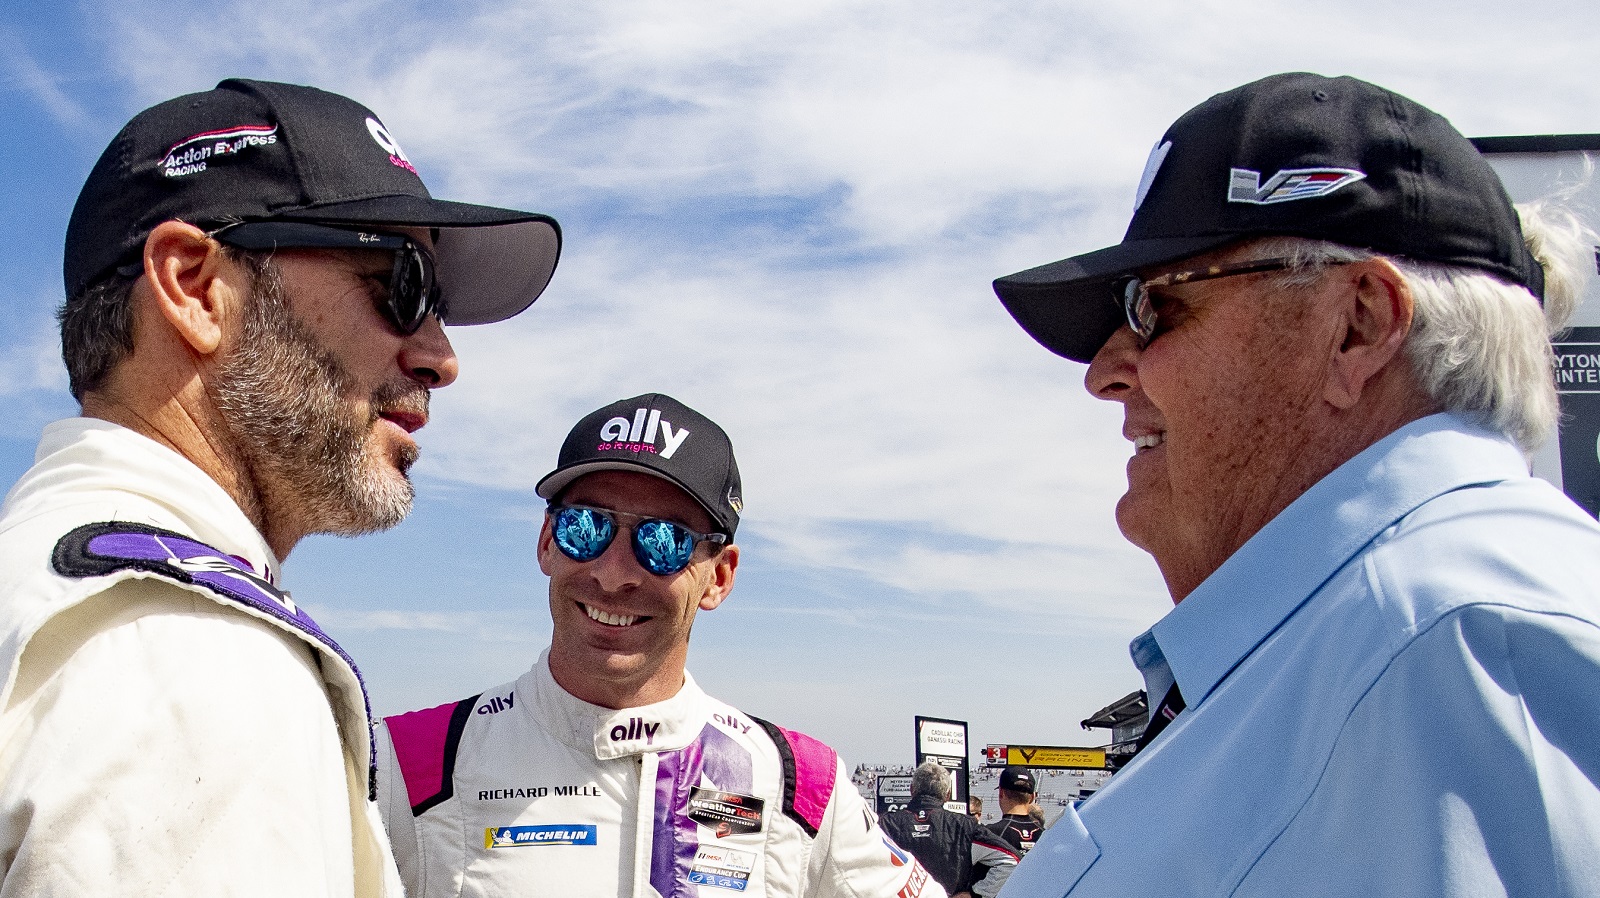 Jimmie Johnson, left, talks with Rick Hendrick, right, and Simon Pagenaud in the pits before the Sahlens Six Hours at the Glen IMSA race on June 27, 2021. | Brian Cleary/Getty Images